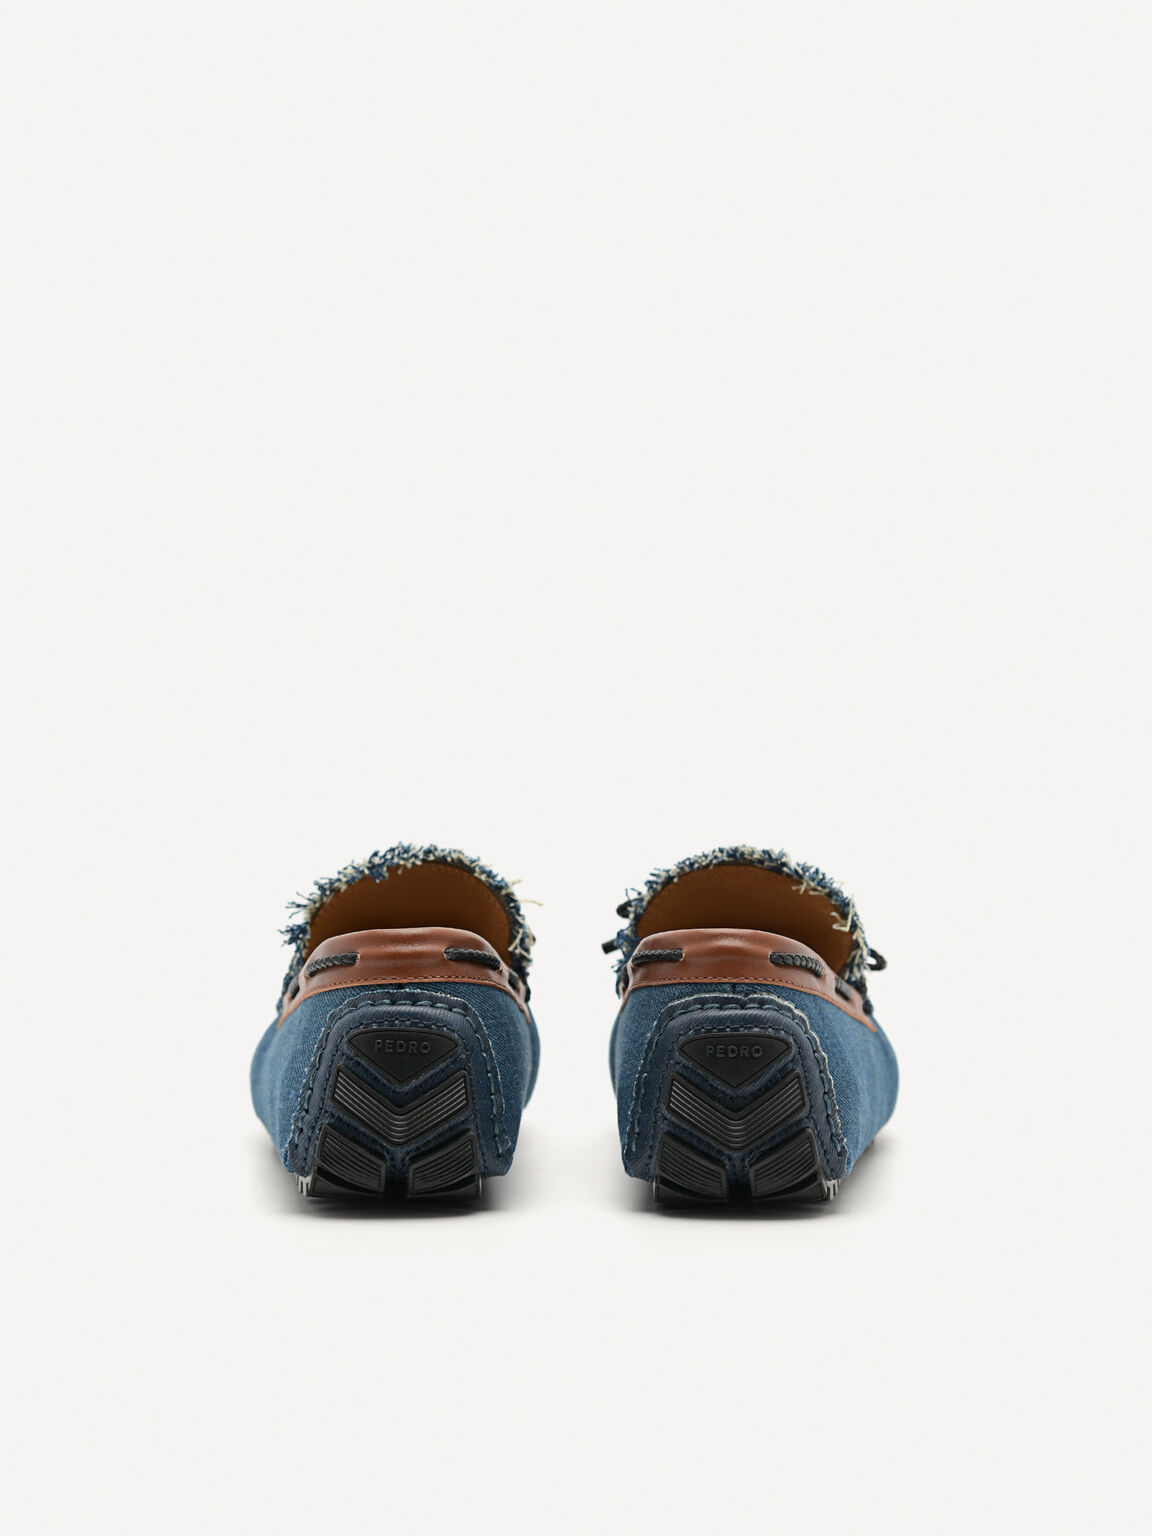 Bow Moccasins, Navy